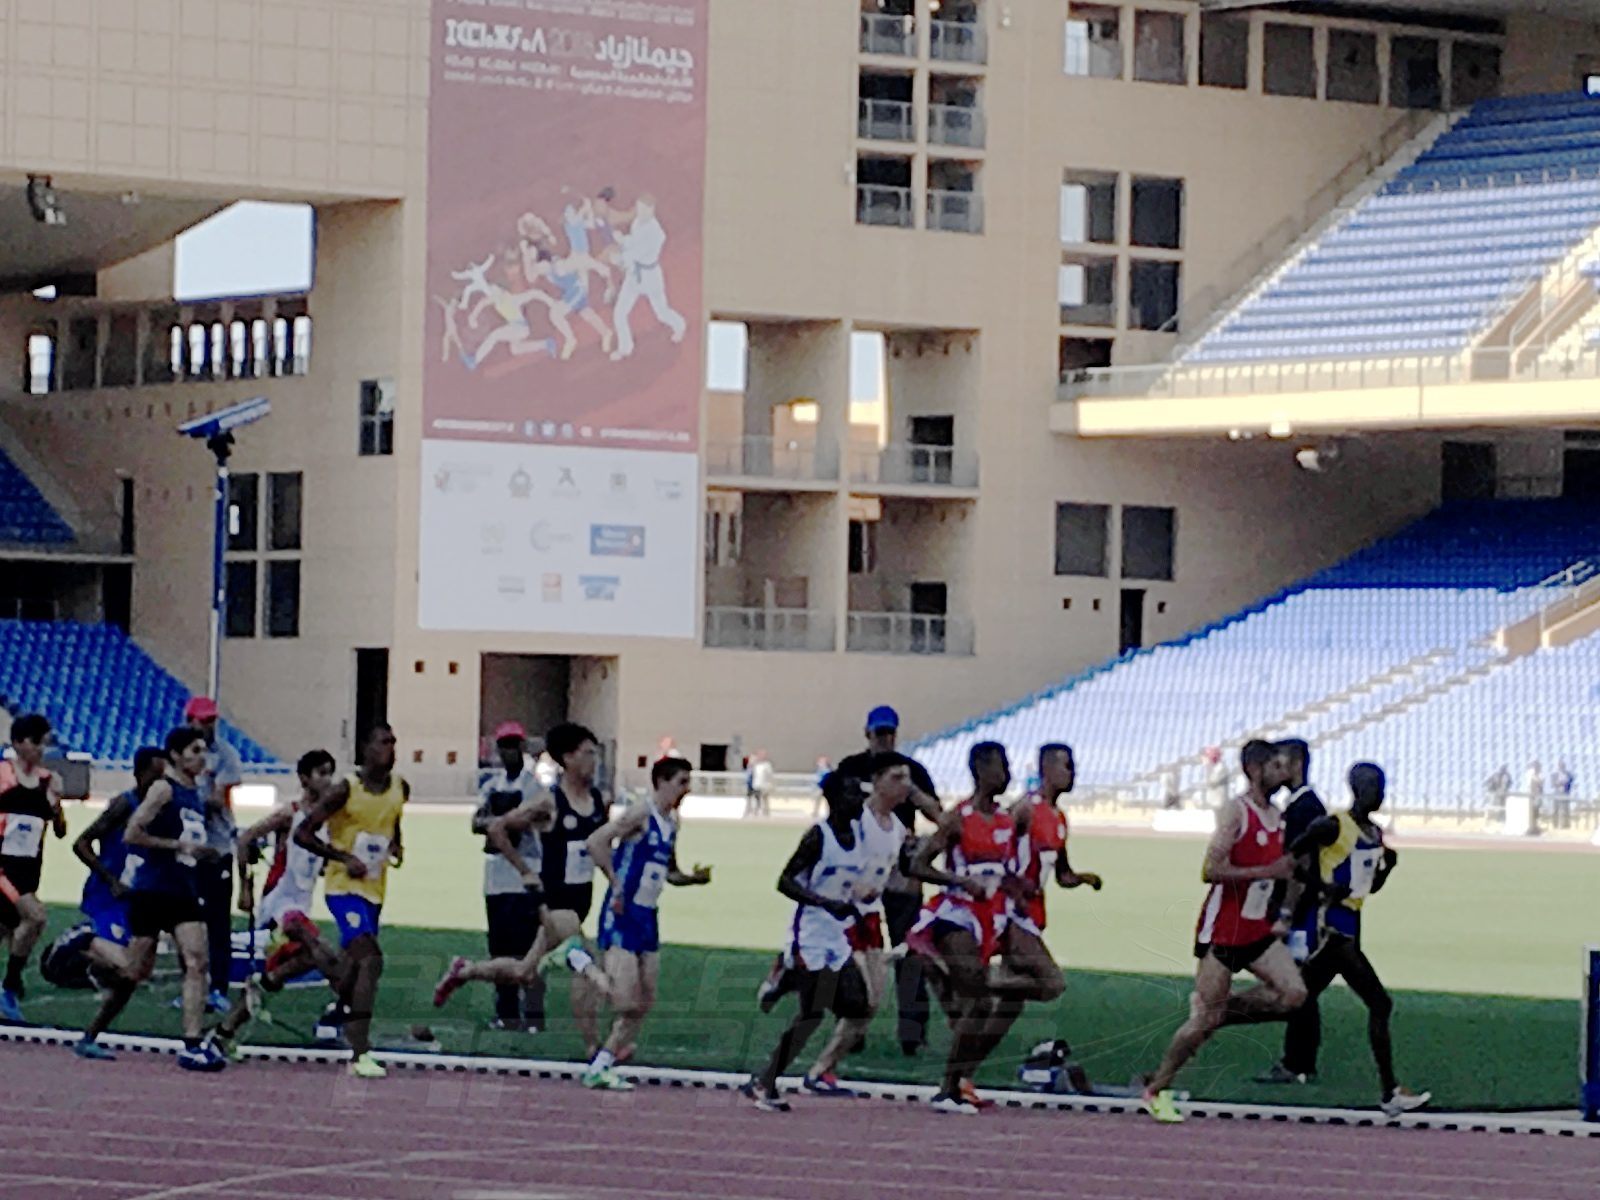 Boys 3000m final at the Gymnasiade 2018 in Marrakech / Photo Credit: Yomi Omogbeja